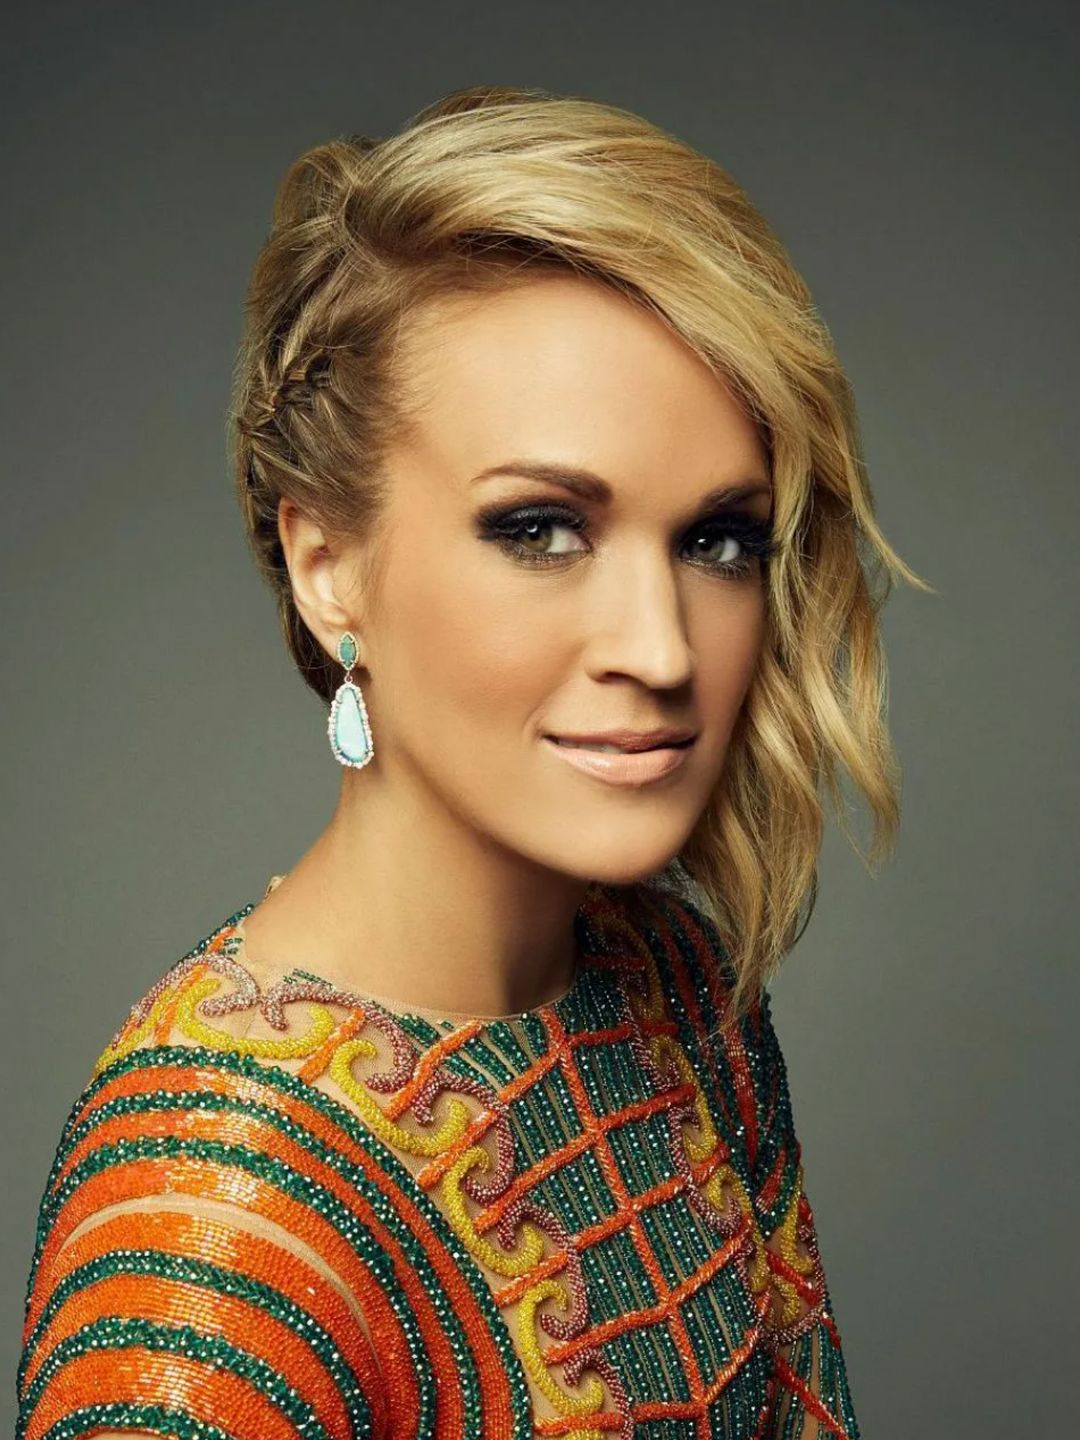 Carrie Underwood her zodiac sign